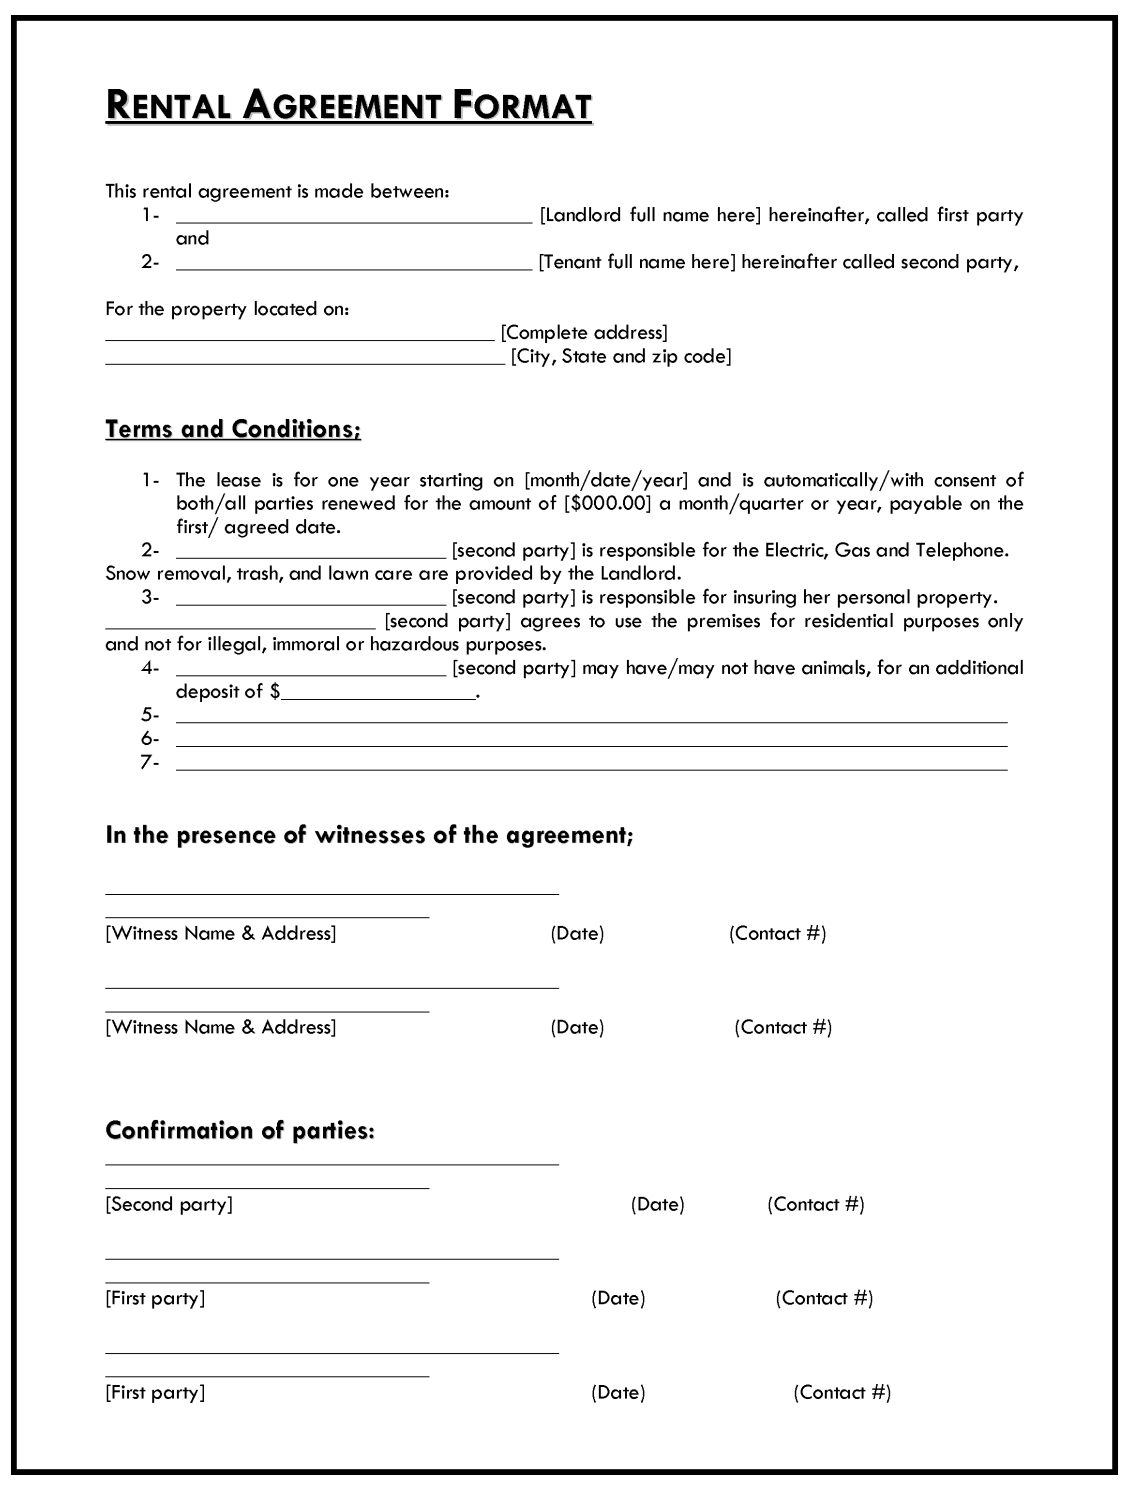 Rental Agreement Letter Sample from www.word-formats.com